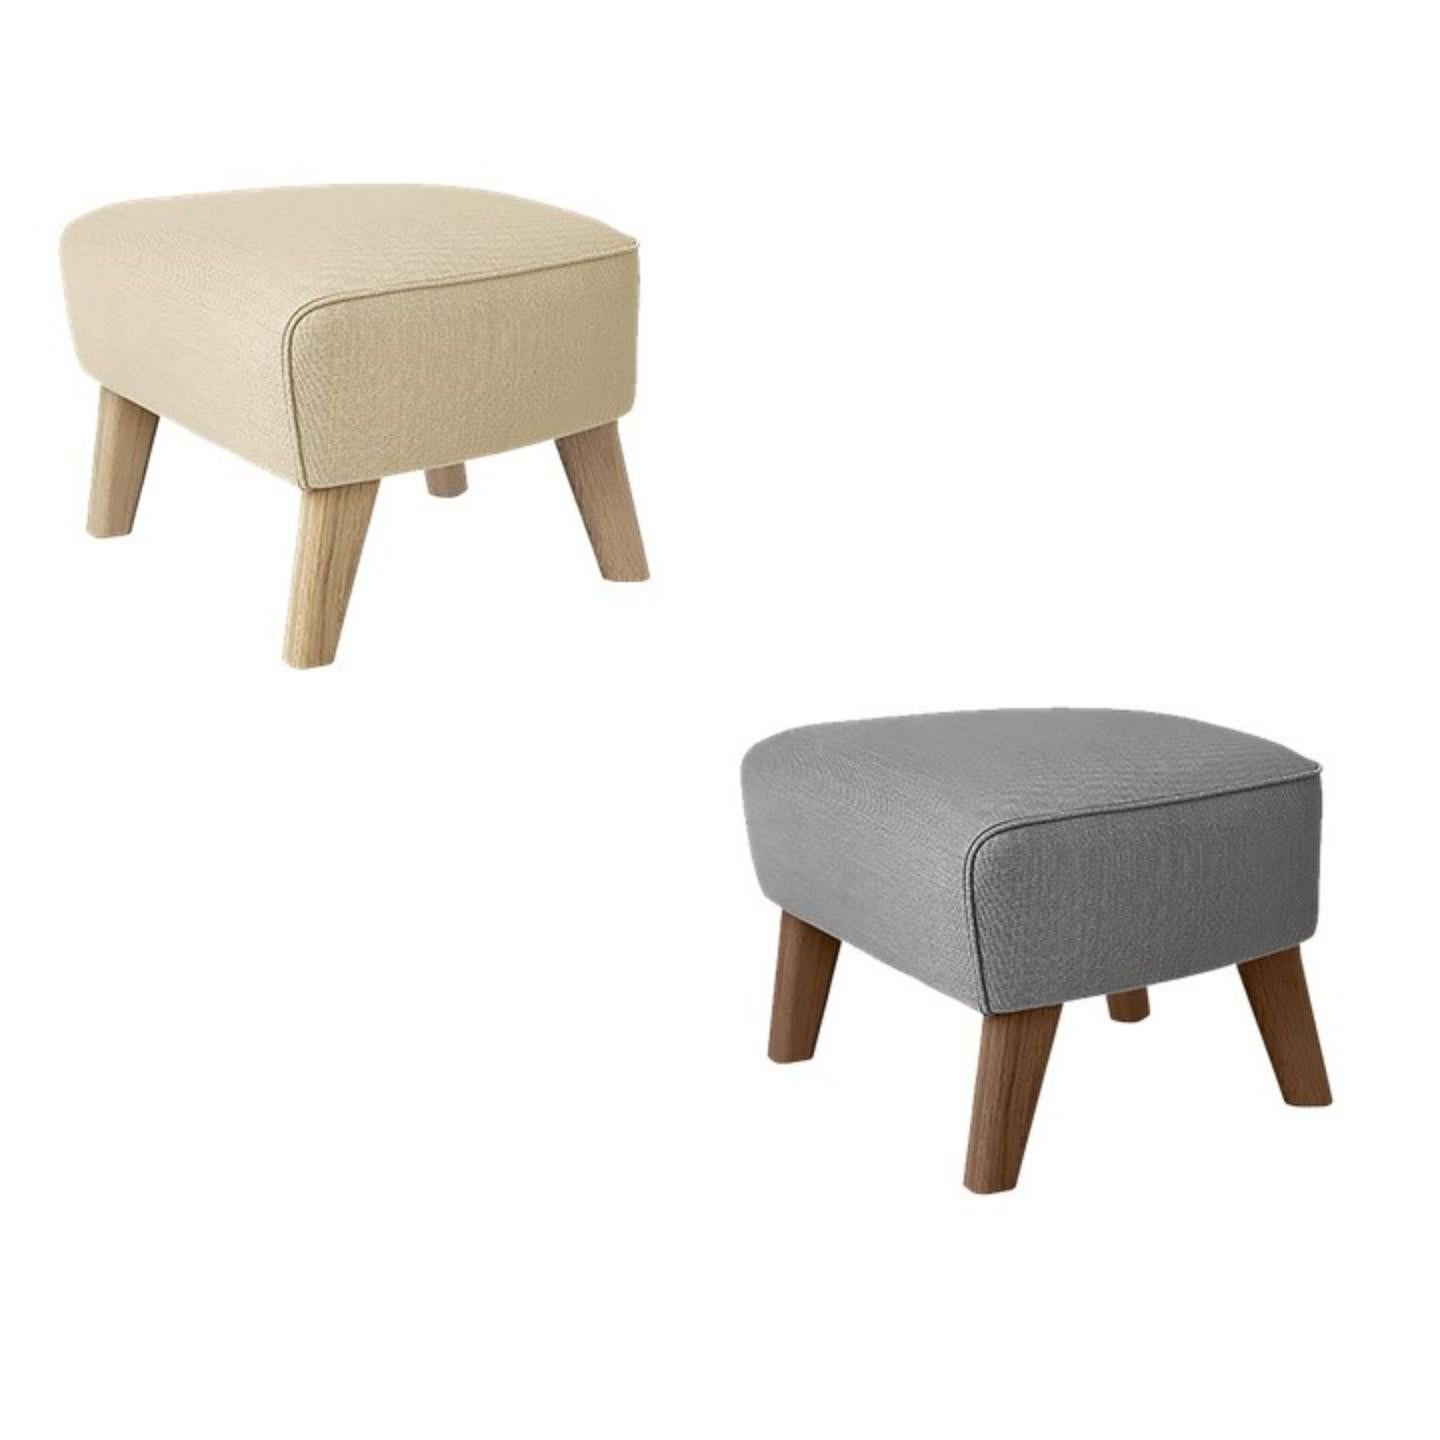 Other Set of 2 Sand and Natural Oak Sahco Zero Footstool by Lassen For Sale